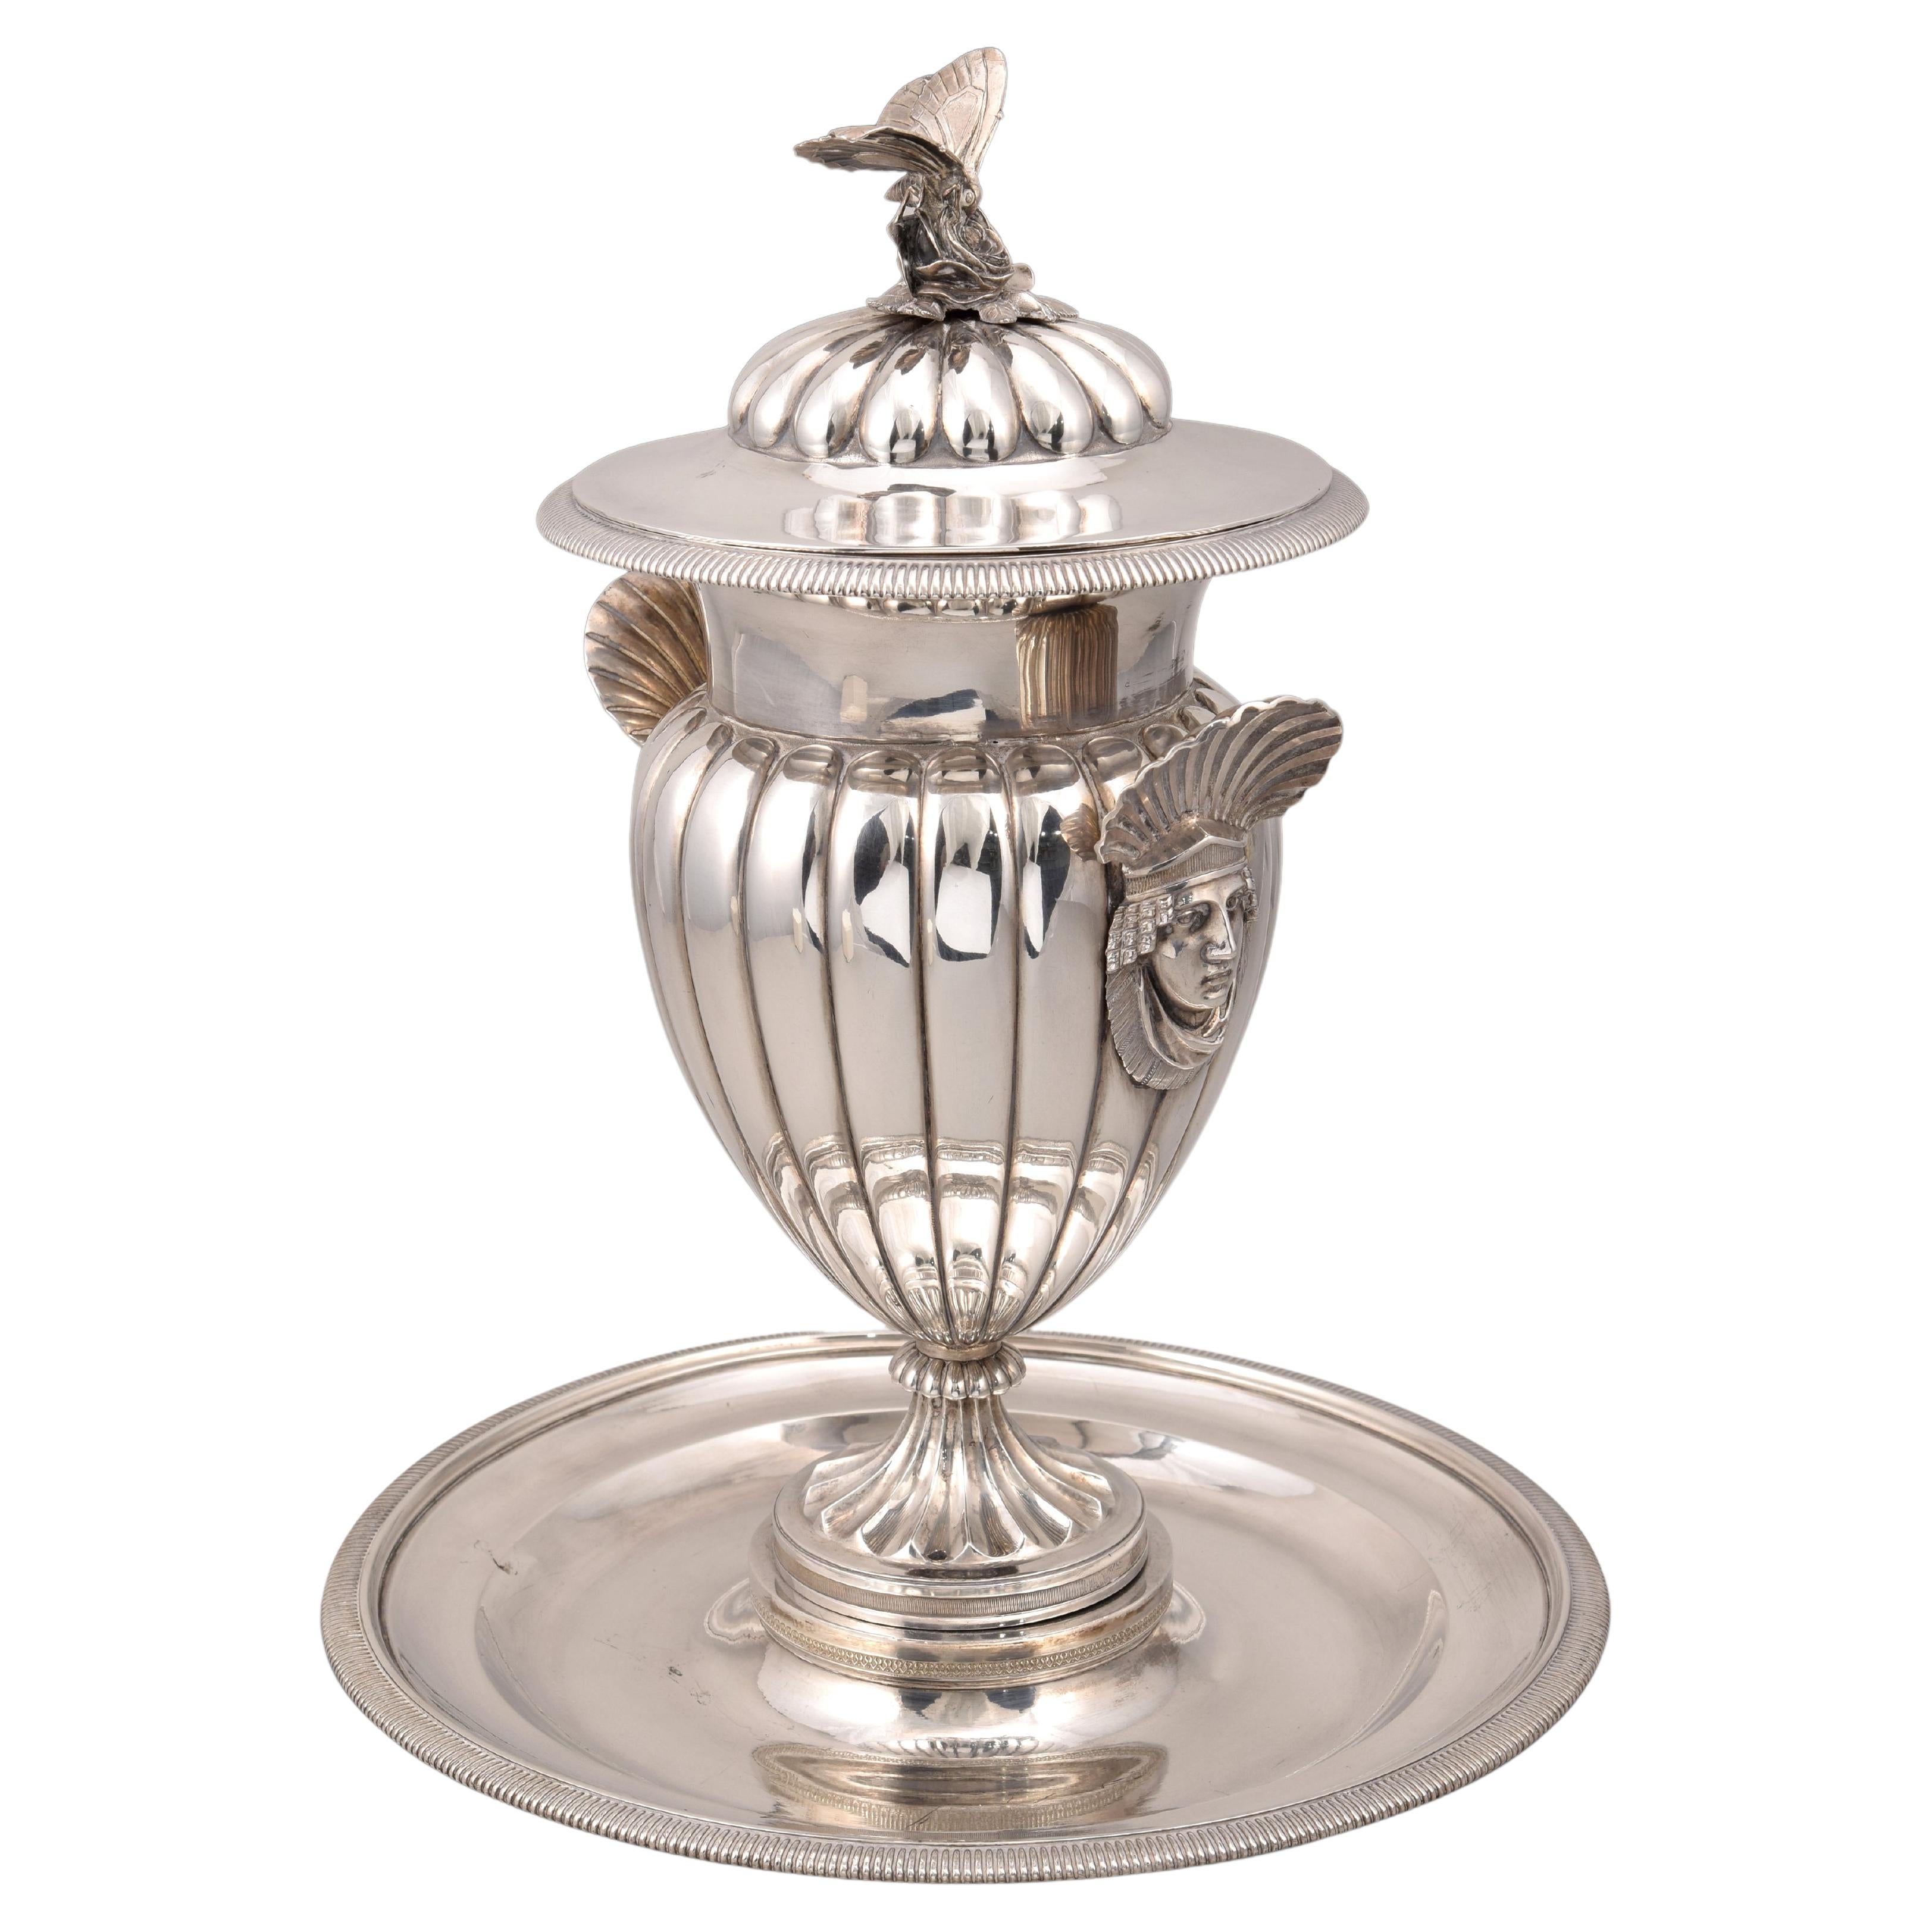 Cup with tray. Royal Silver Factory of Antonio Martínez. Madrid, Spain, 1830s. For Sale